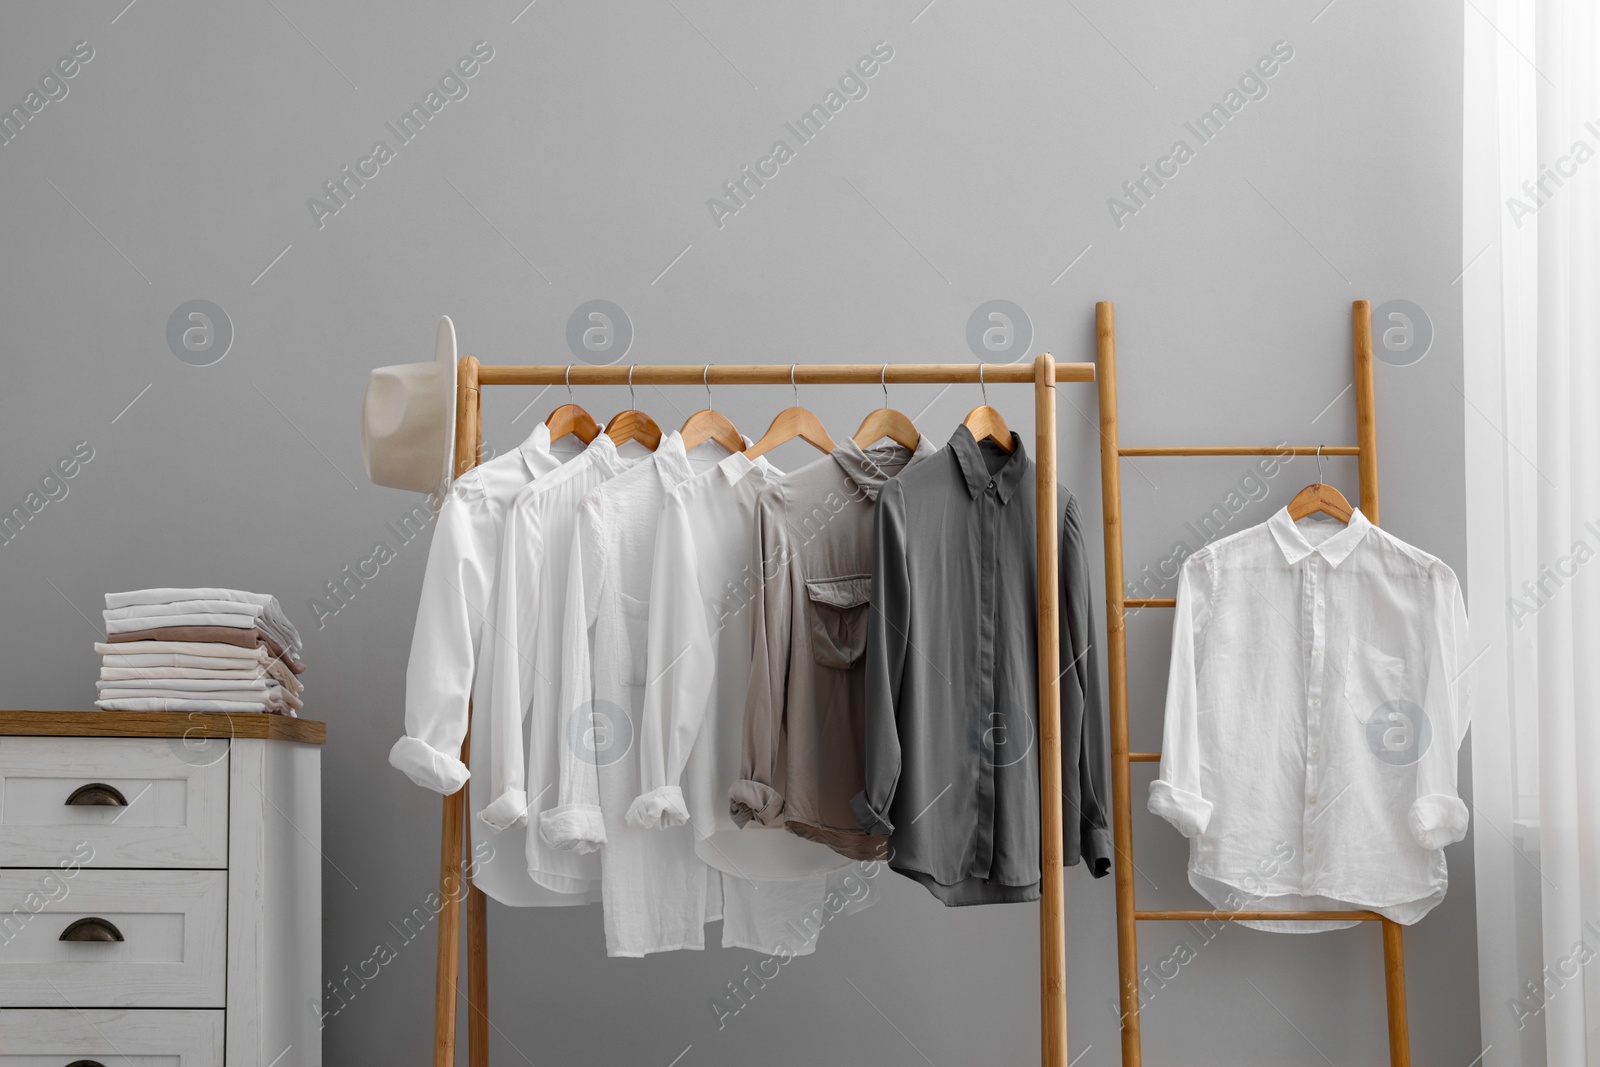 Photo of Rack with different stylish shirts, hat and chest of drawers near grey wall indoors. Organizing clothes